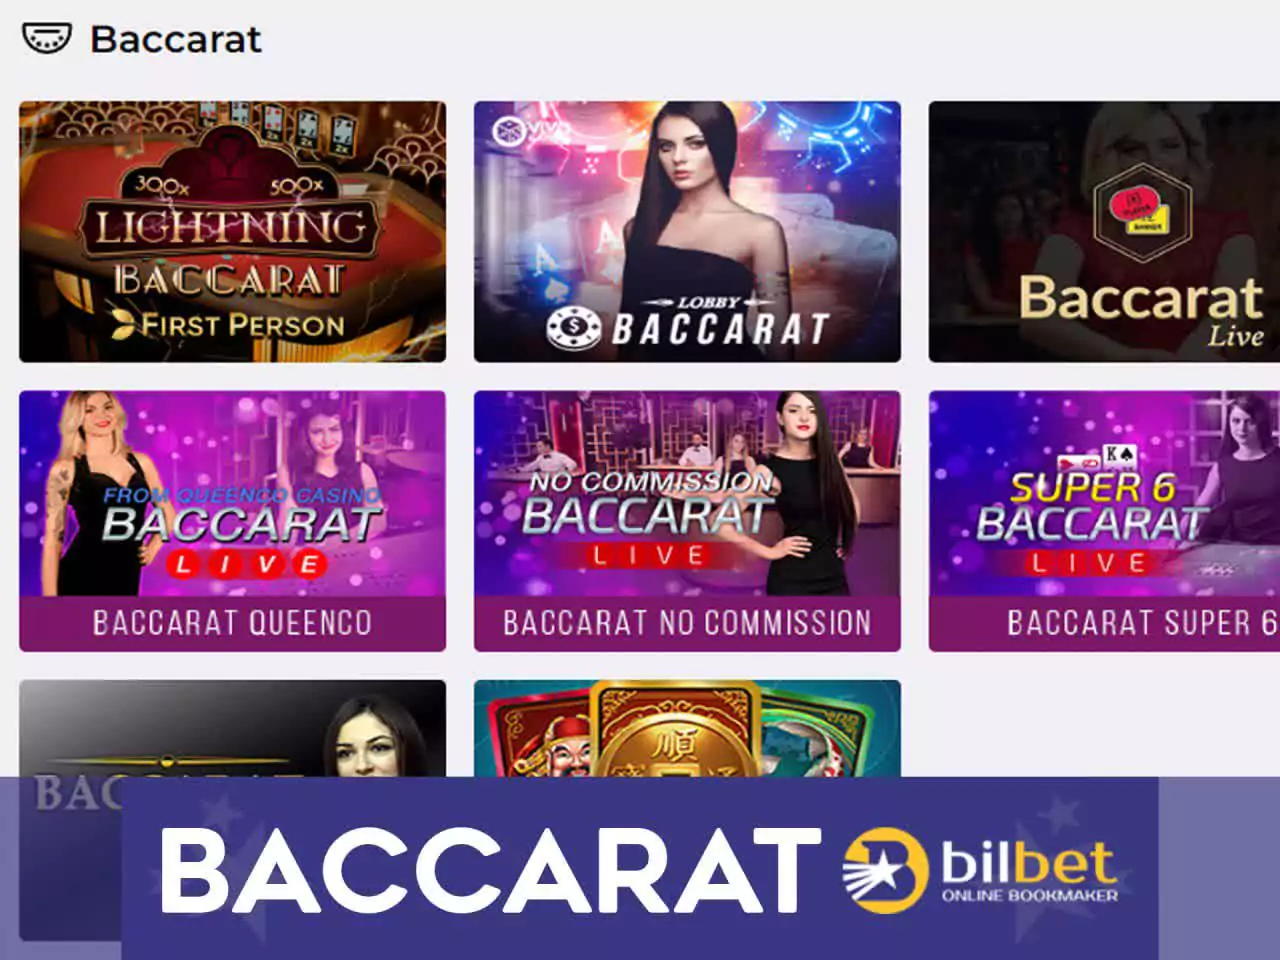 Baccarat is also an option to play at Bilbet casino.